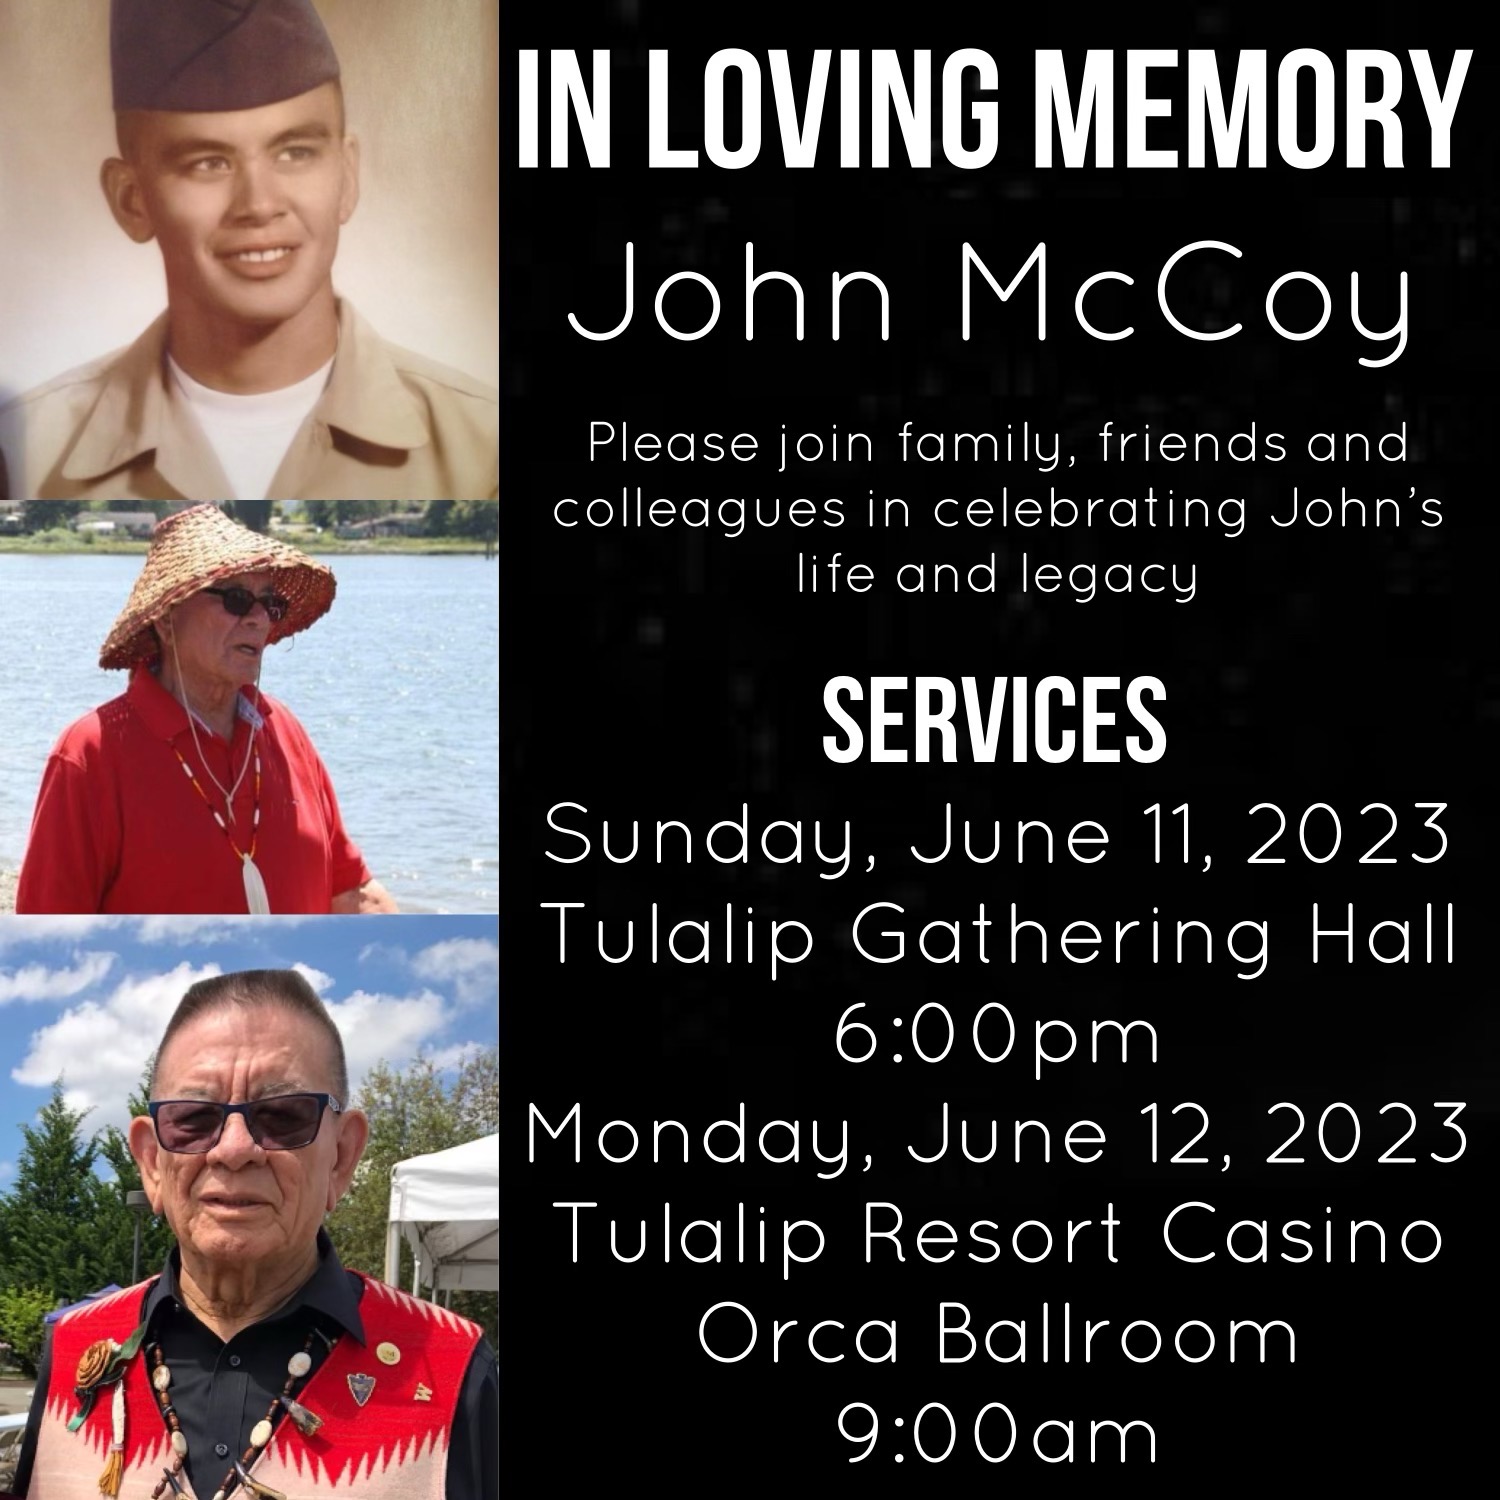 Please join Senator McCoy’s family, friends, and colleagues to celebrate his life and legacy at services next week: Sunday, June 11, 6:00 p.m. at the Tulalip Gathering Hall Monday, June 12, 9:00 a.m. at the Tulalip Resort Casino Orca Ballroom